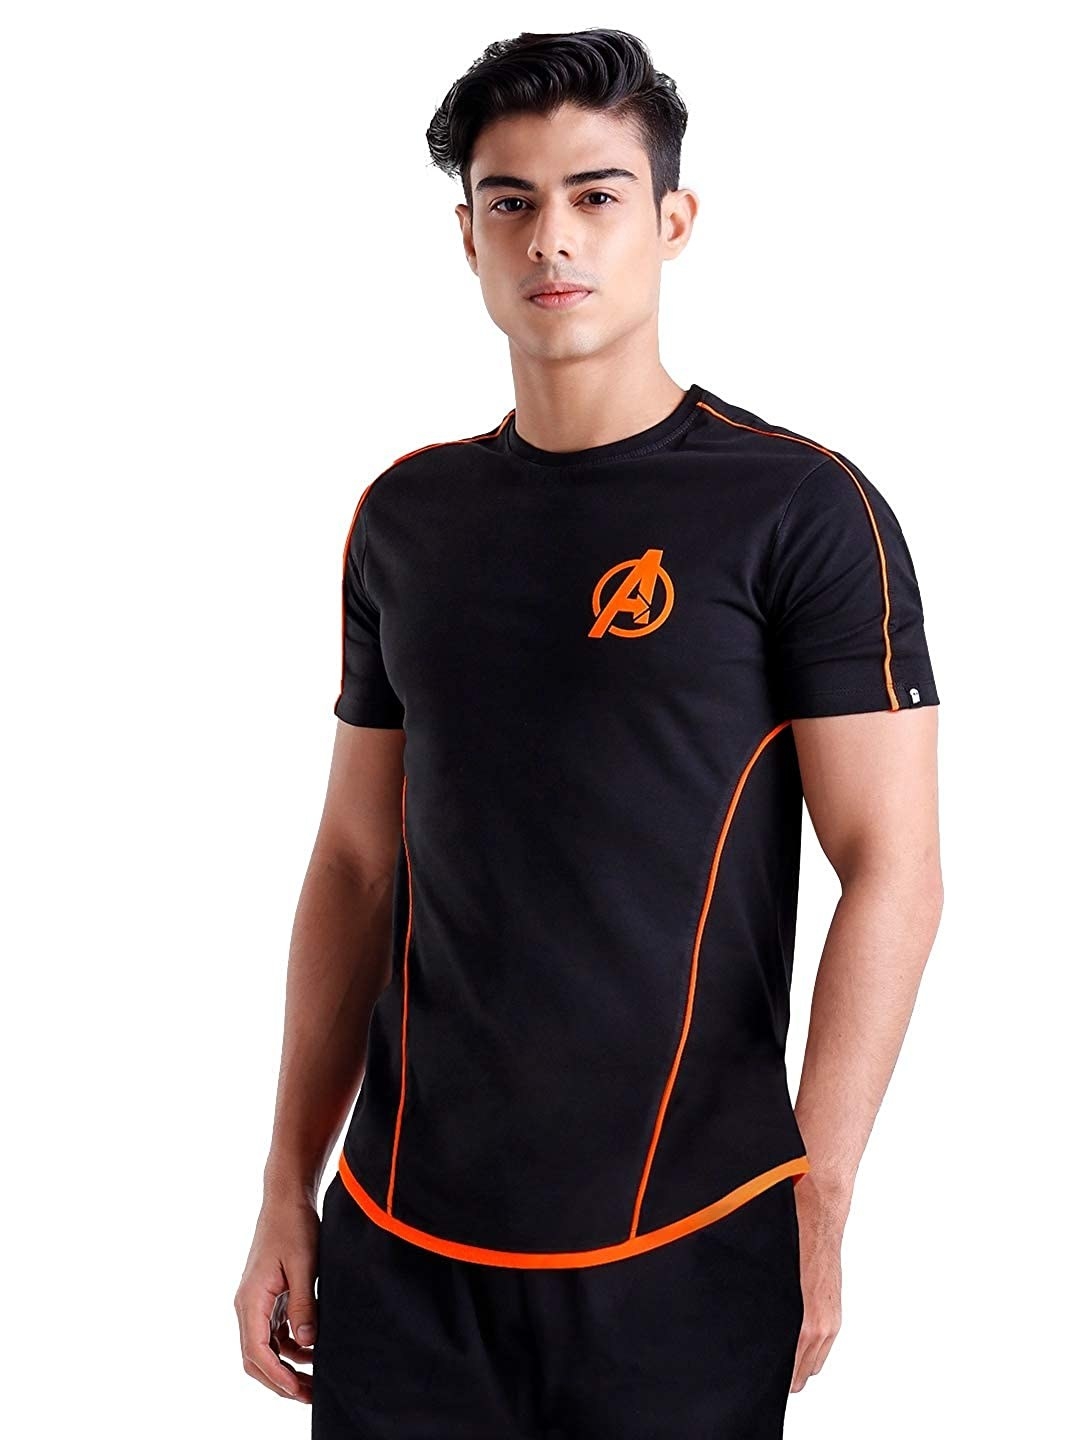 A black t-shirt with the Avengers logo in orange in the corner.